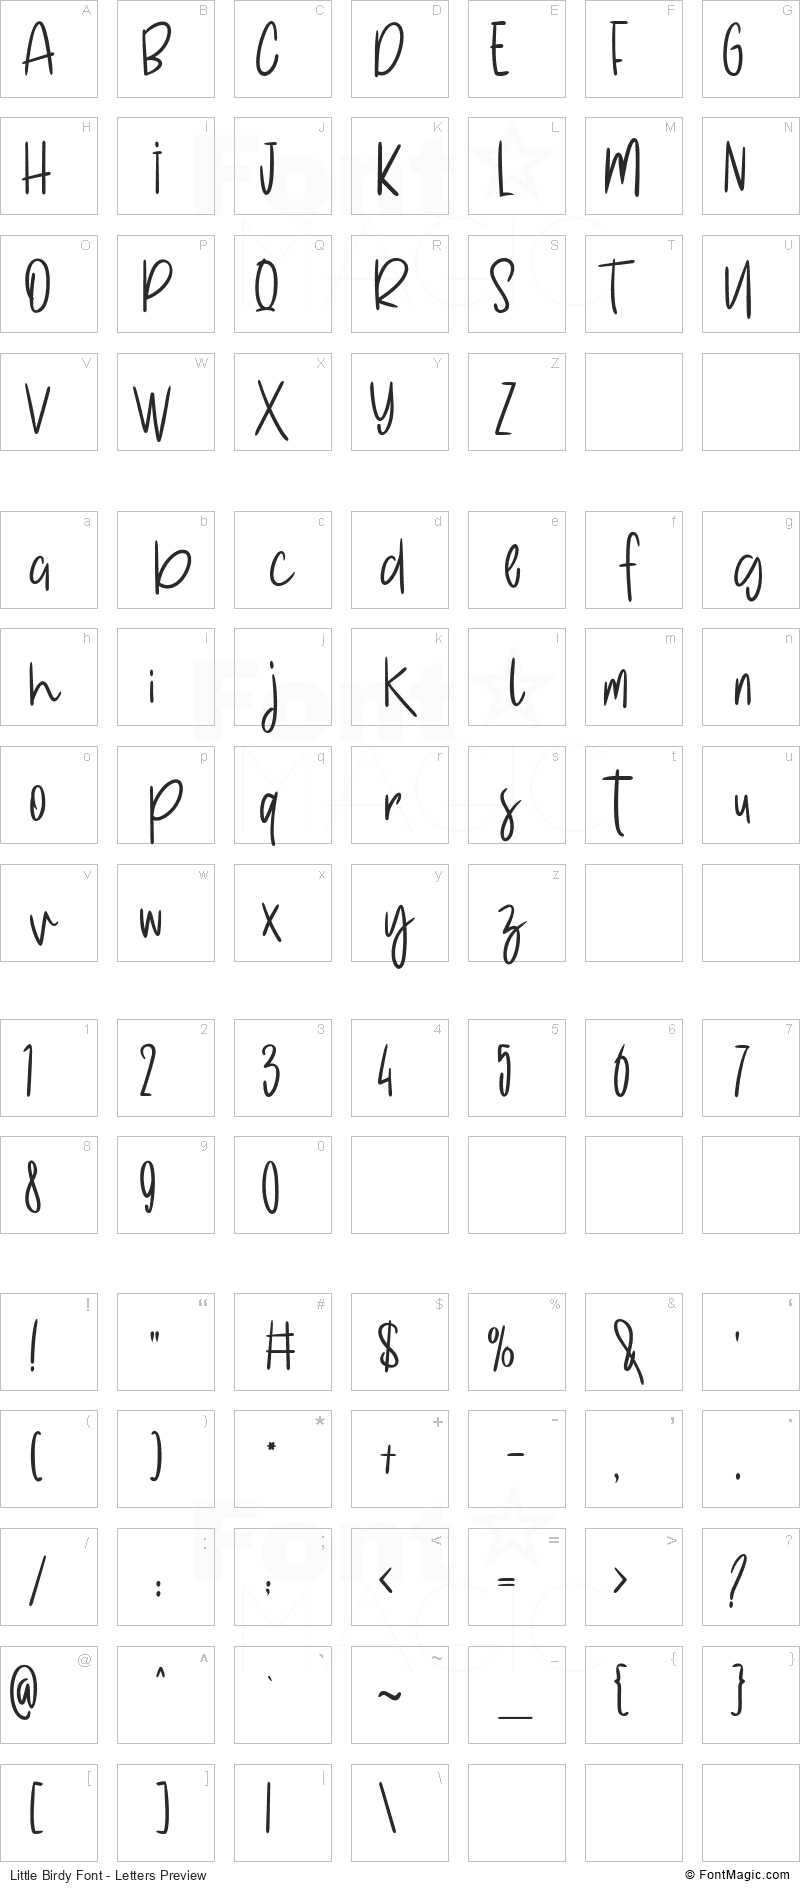 Little Birdy Font - All Latters Preview Chart